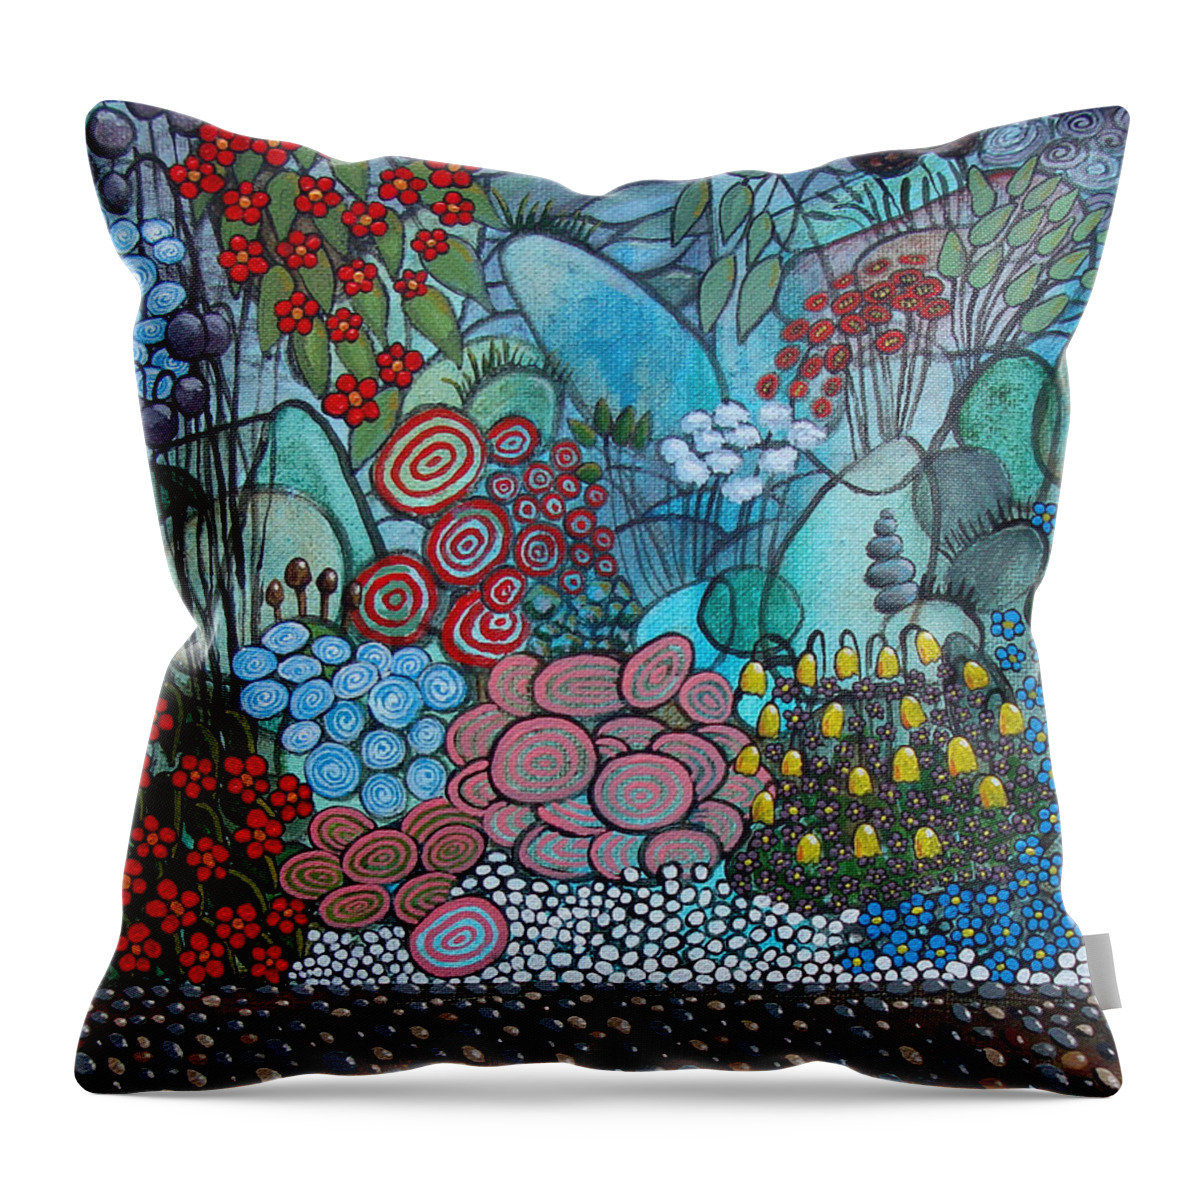 Landscape Throw Pillow featuring the painting By The Bay by Mindy Huntress